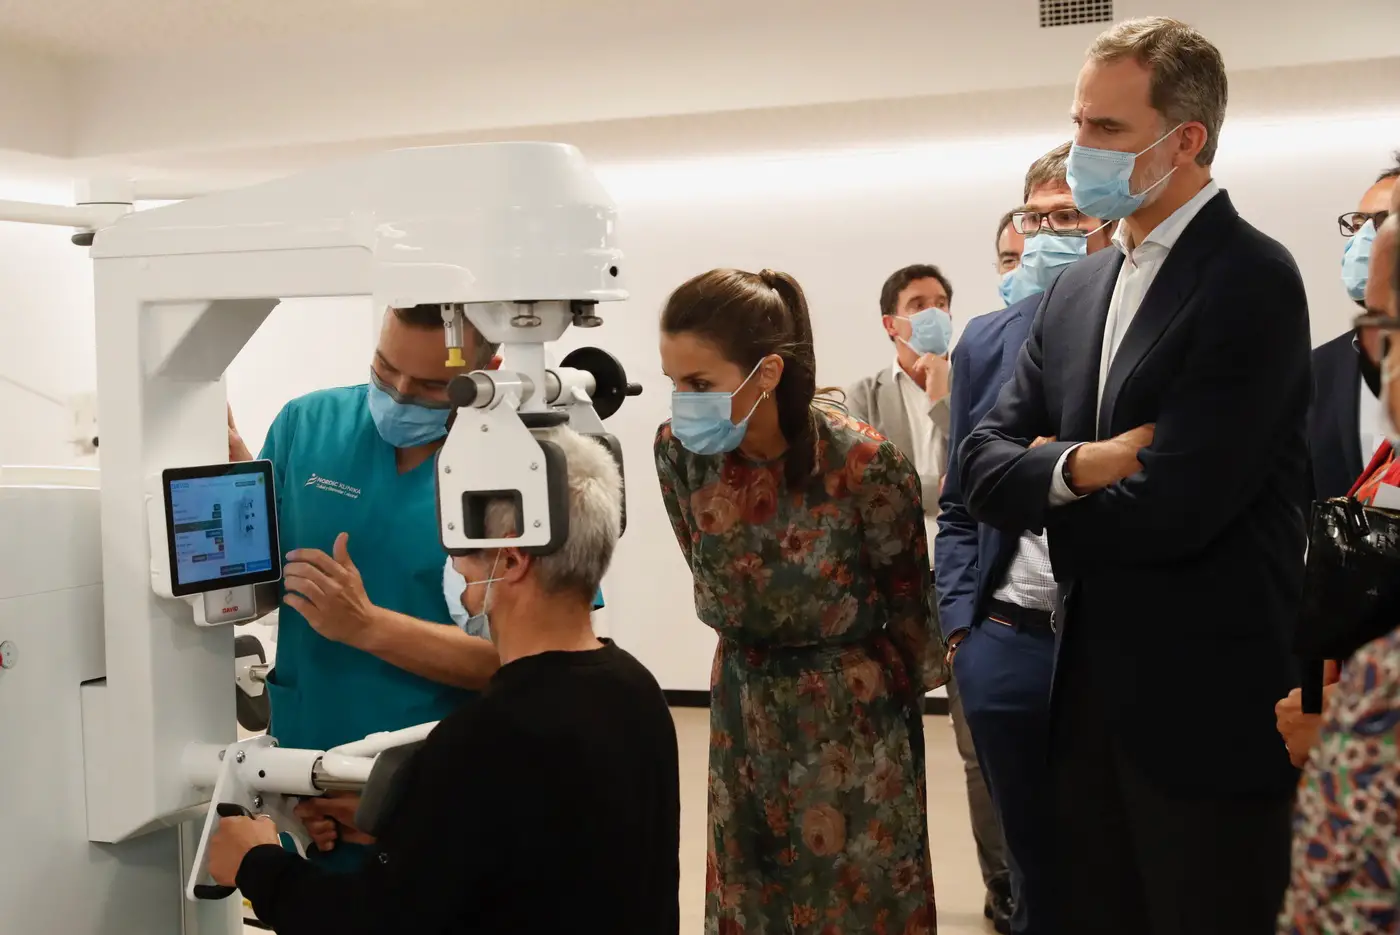 King Felipe and Queen Letizia toured the musculoskeletal treatment room of the San Prudencio Foundation